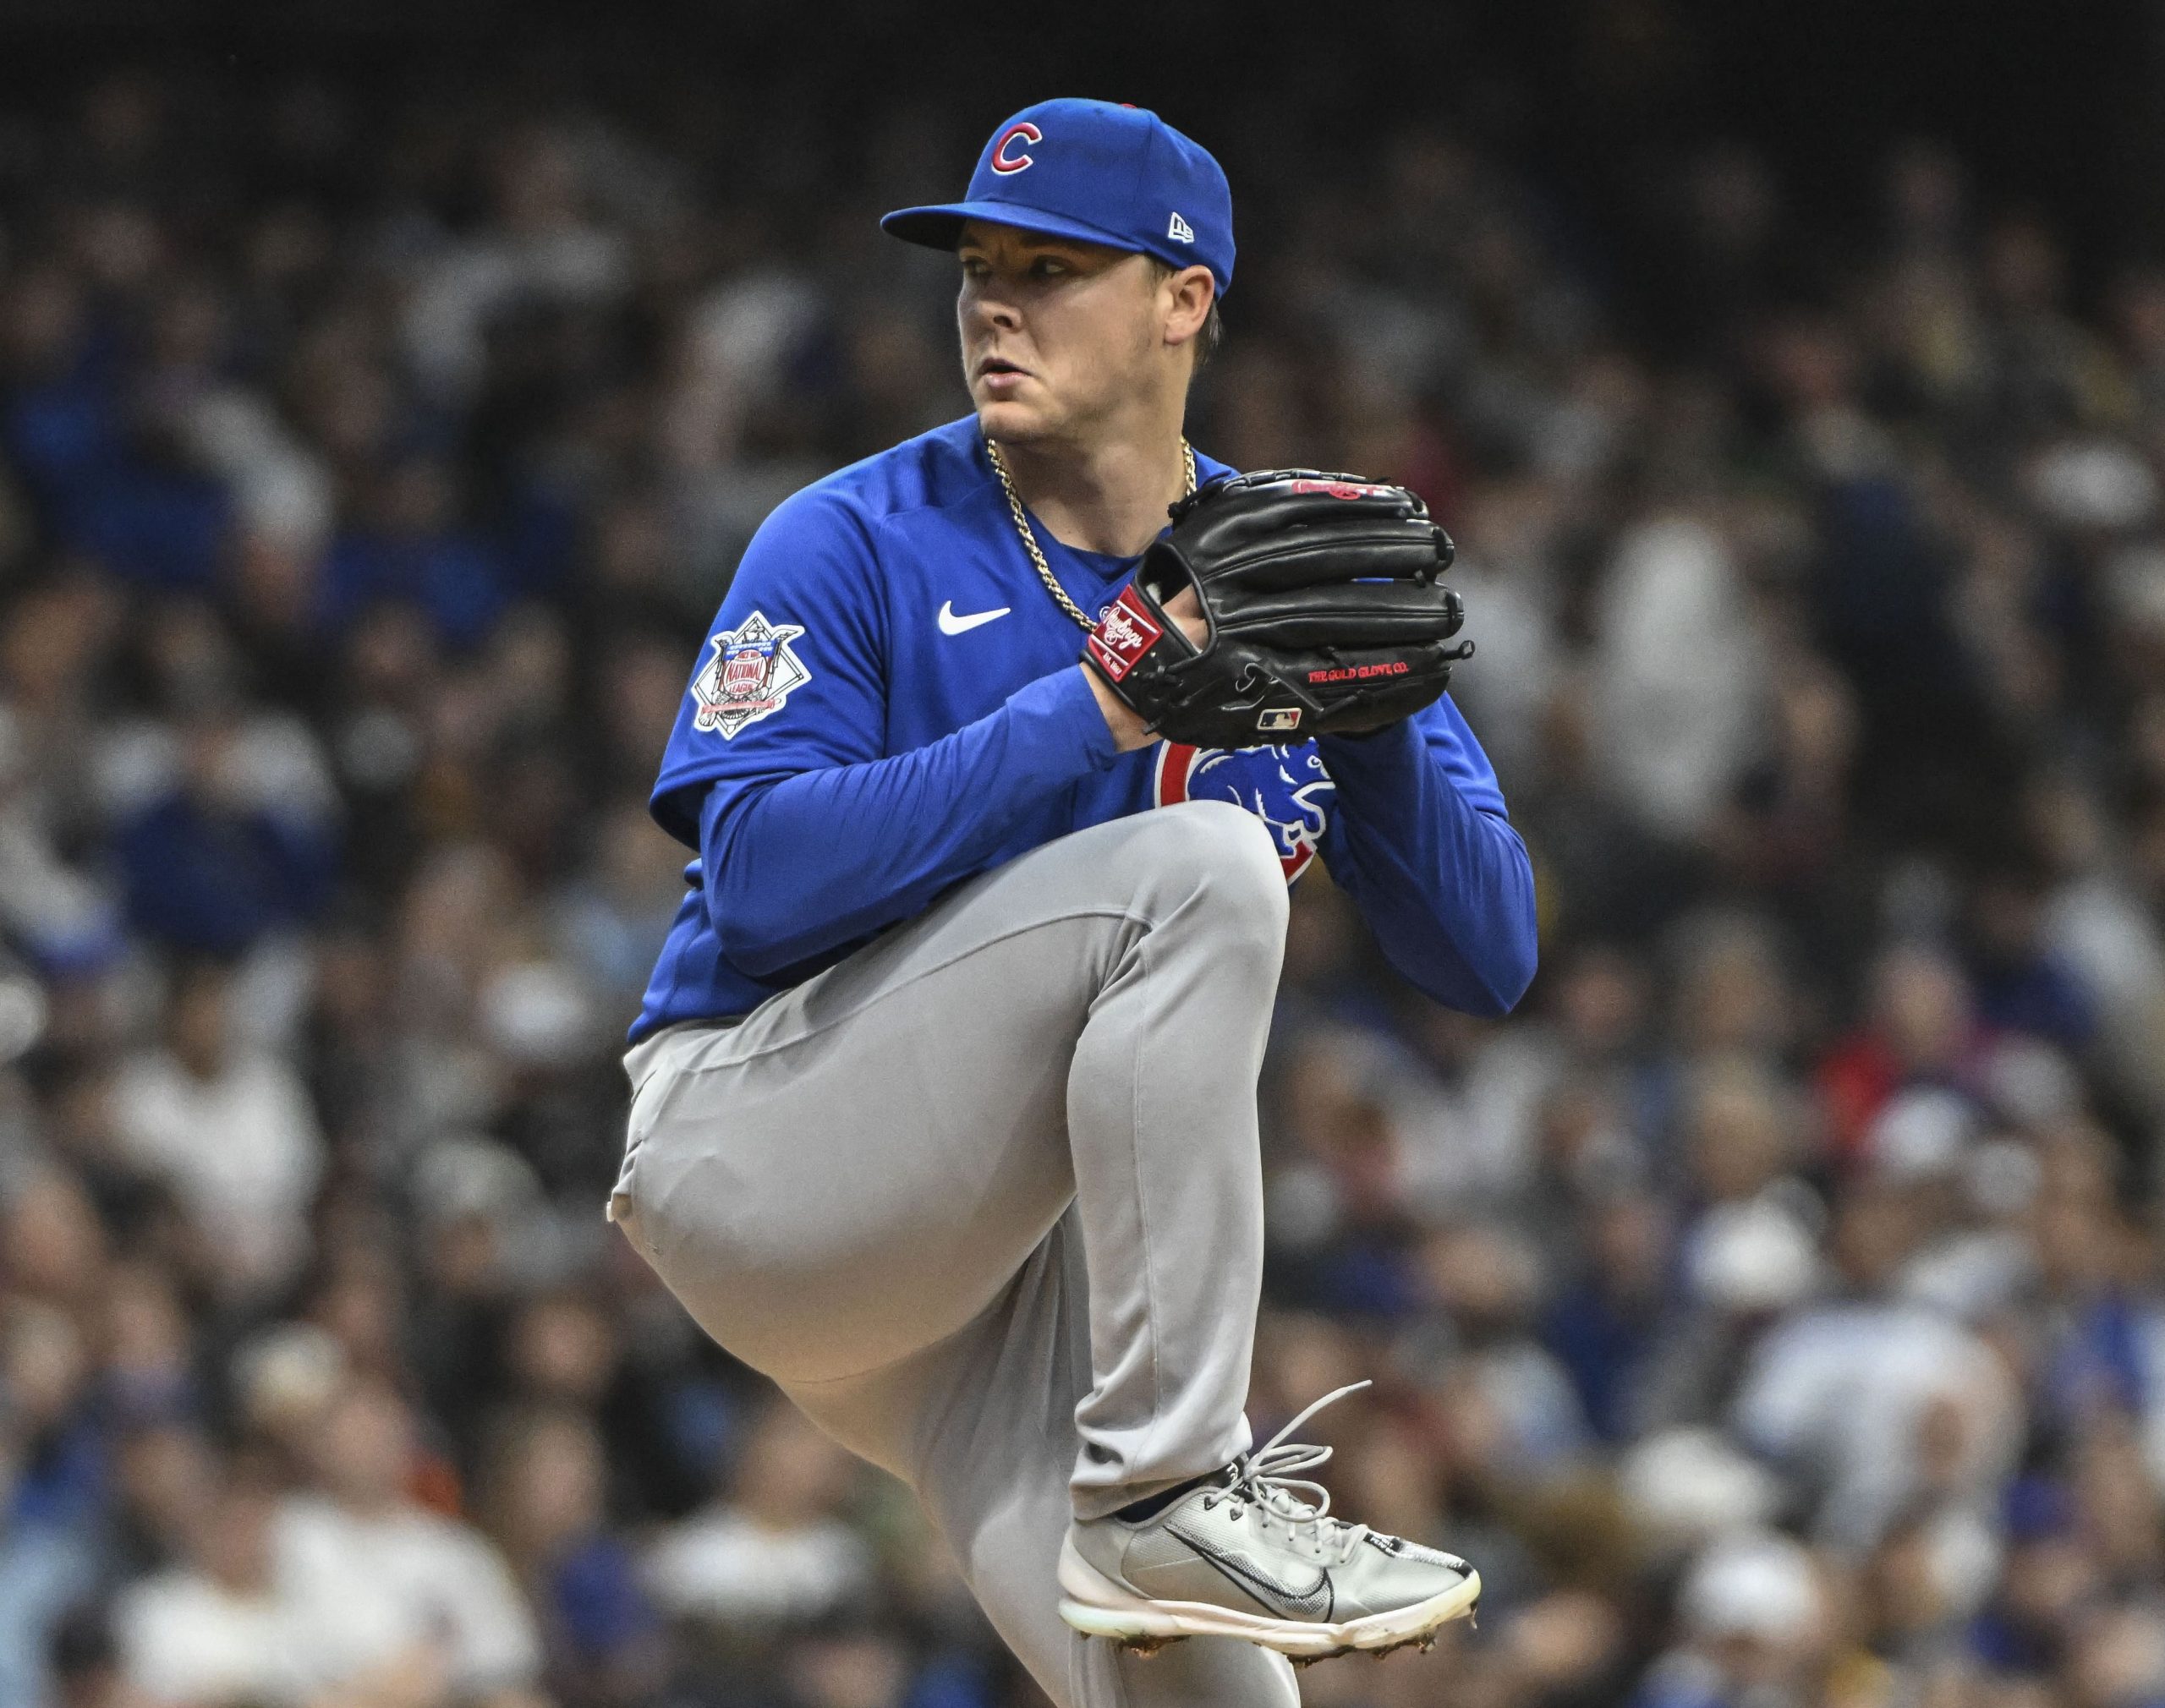 Chicago Cubs pitcher Justin Steele (35) throws against the Milwaukee Brewers in the first inning at American Family Field